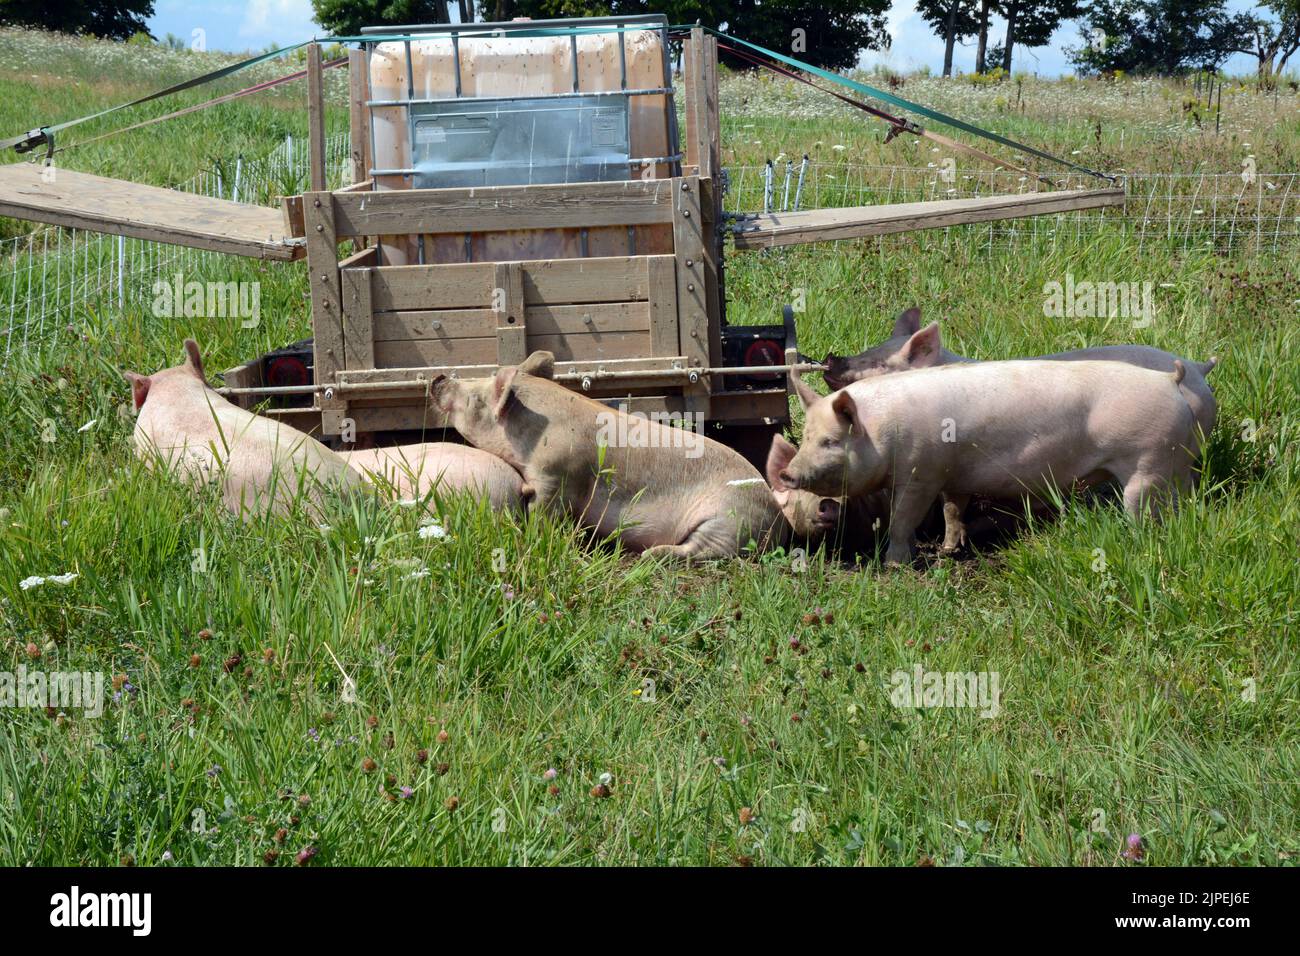 Free range pigs drinking from a water trough humanely raised at an organic sustainable small-scale farm near the town of Creemore, Ontario, Canada. Stock Photo